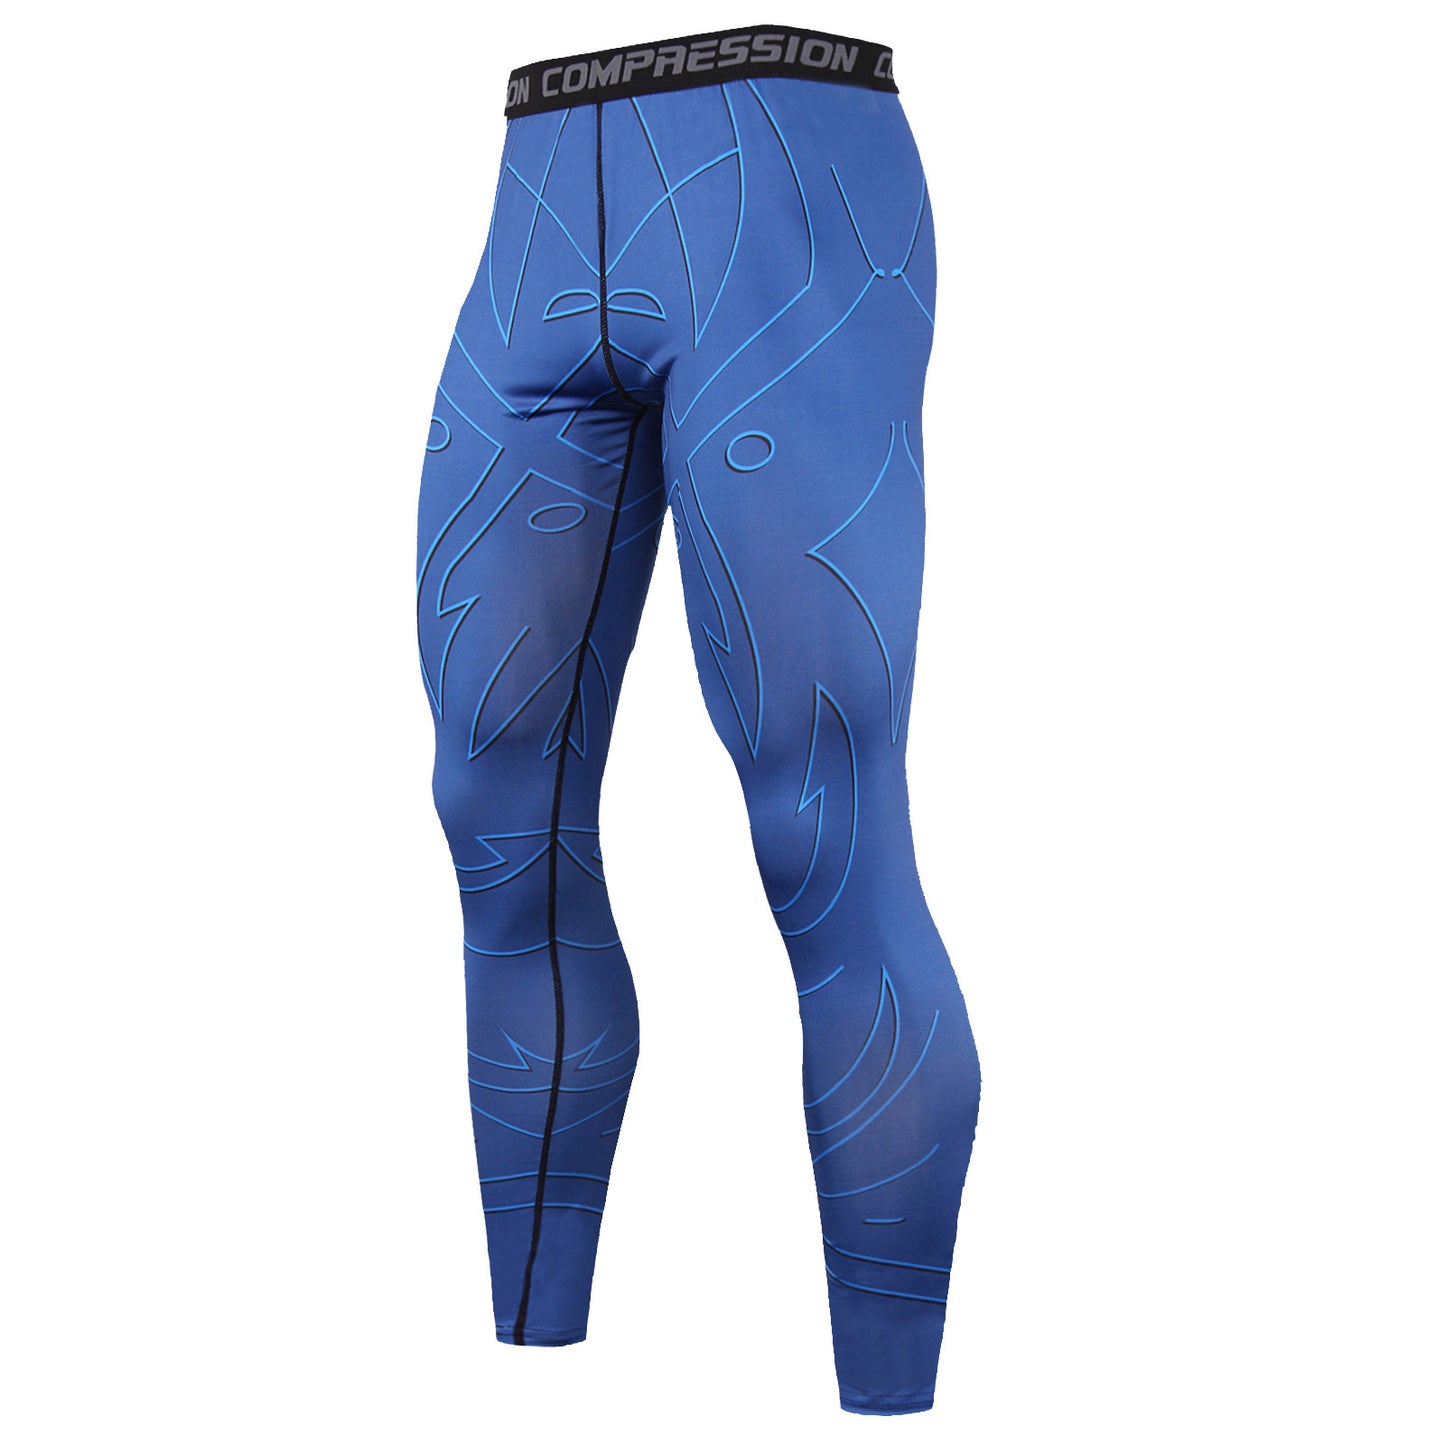 Men's Skinny Fitness Quick Dry Casual Sports Pants